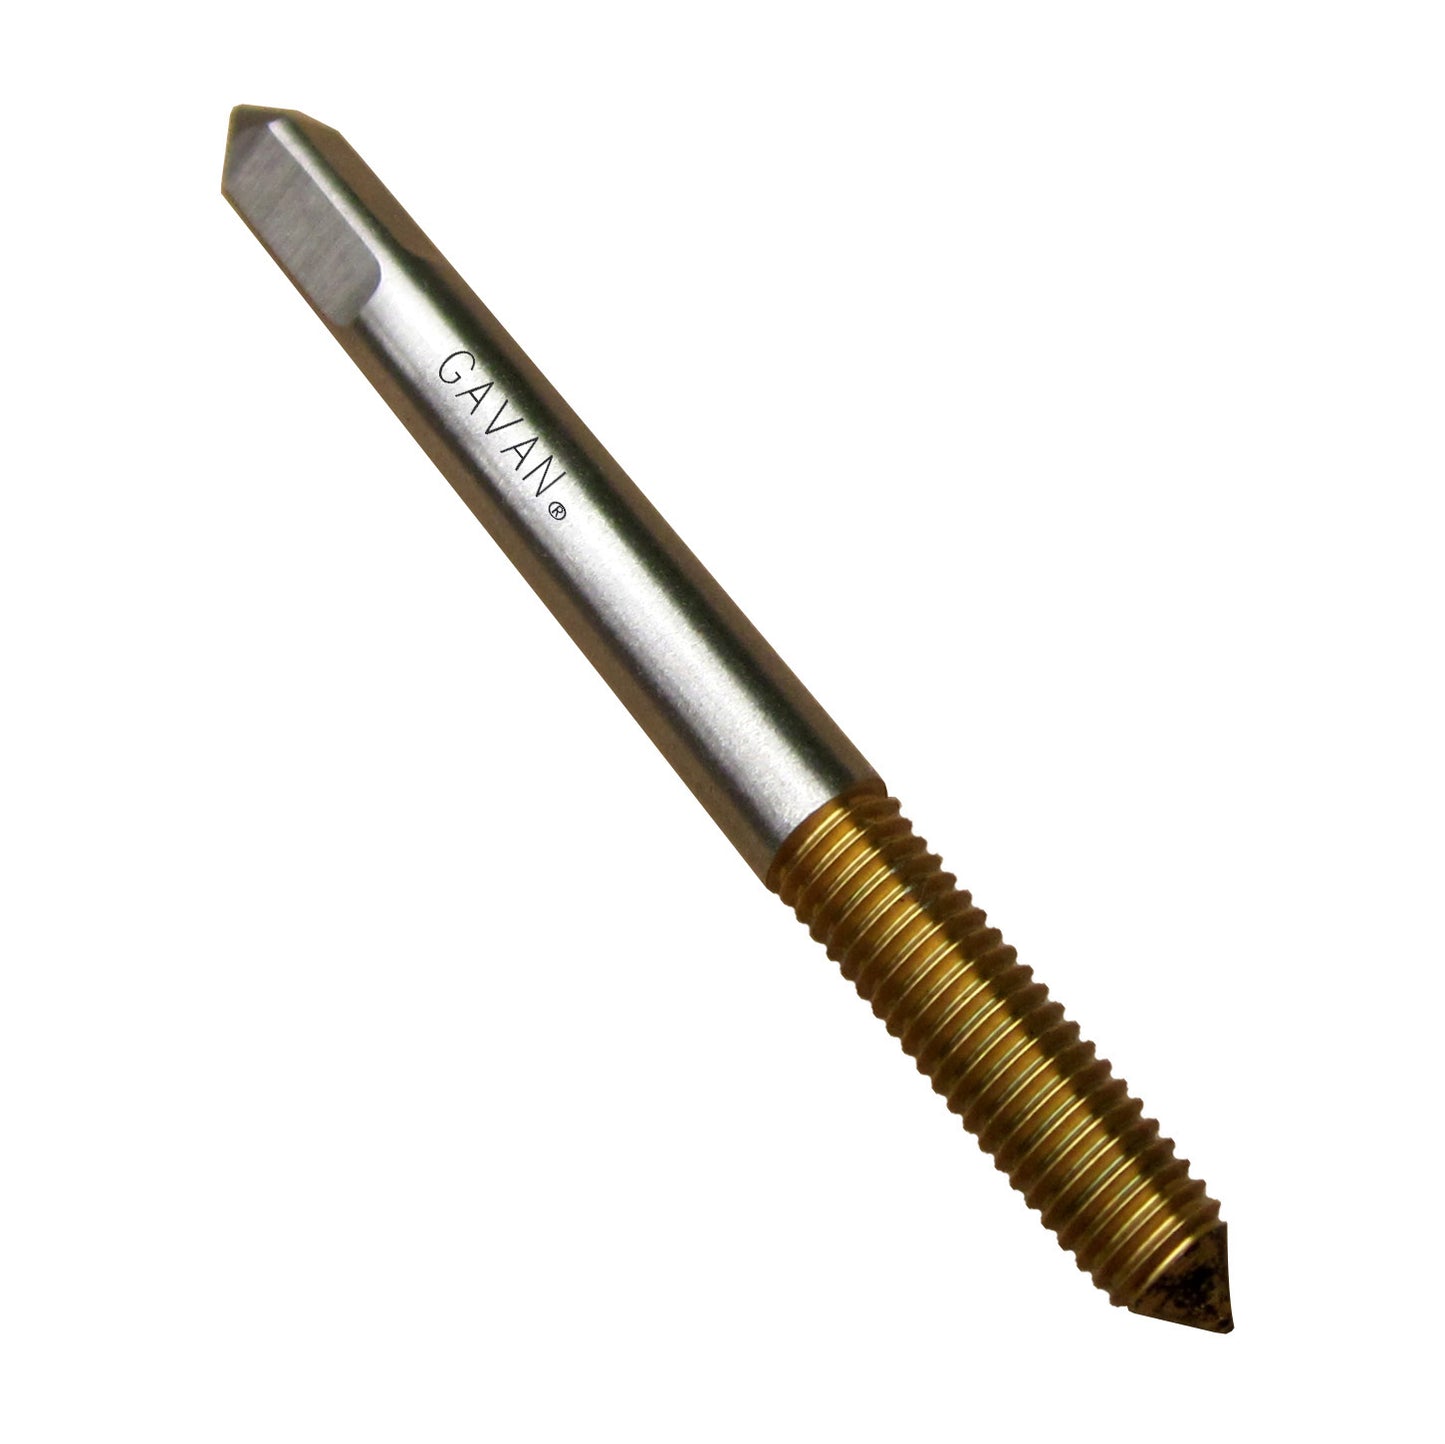 M6 x 0.75 HSS Left hand Thread Forming Tap